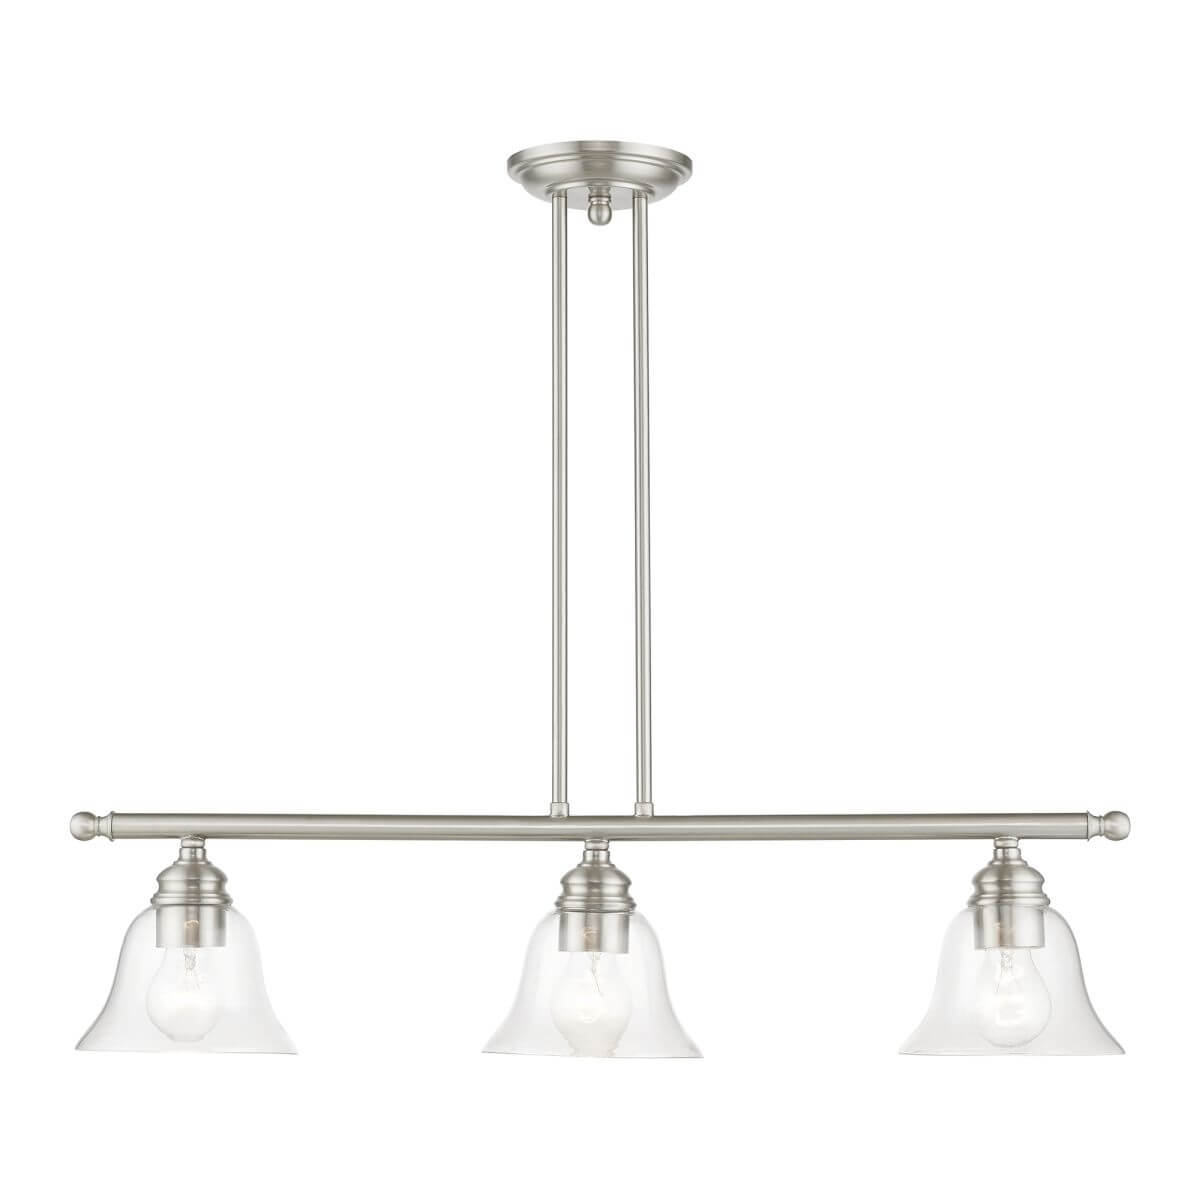 Livex 46487-91 Moreland 3 Light 30 inch Linear Light in Brushed Nickel with Hand Blown Clear Glass